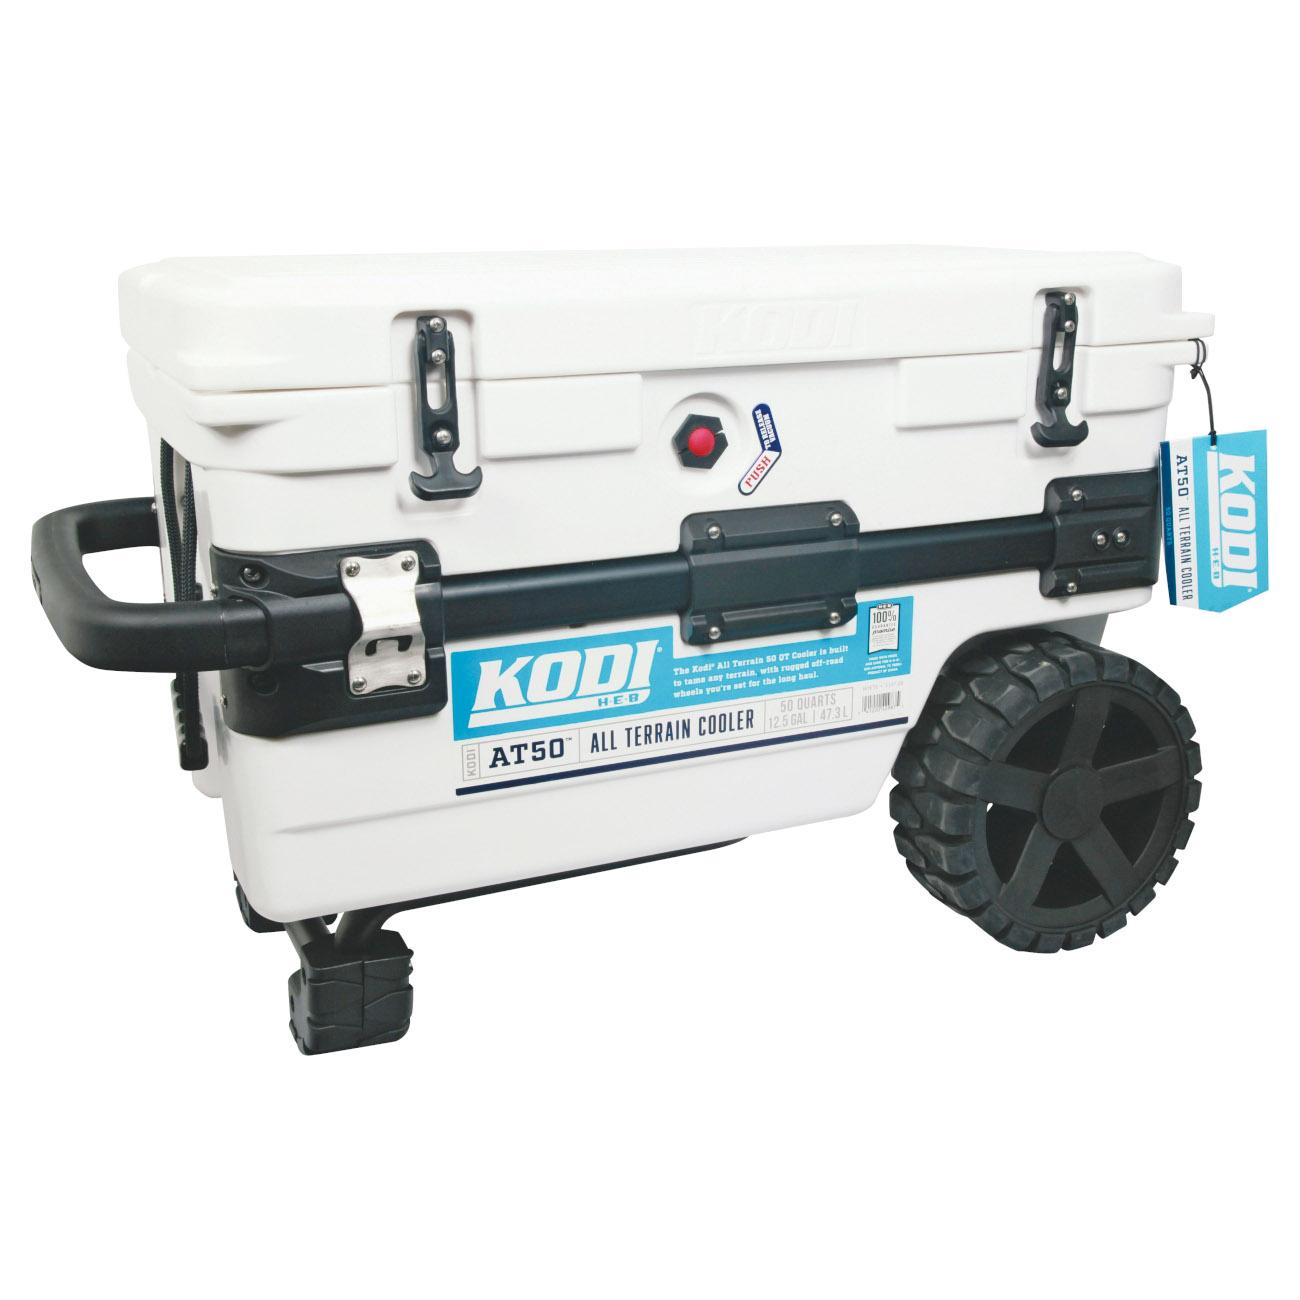 KODI by H-E-B AT50 All Terrain Wheeled Cooler - White; image 1 of 2